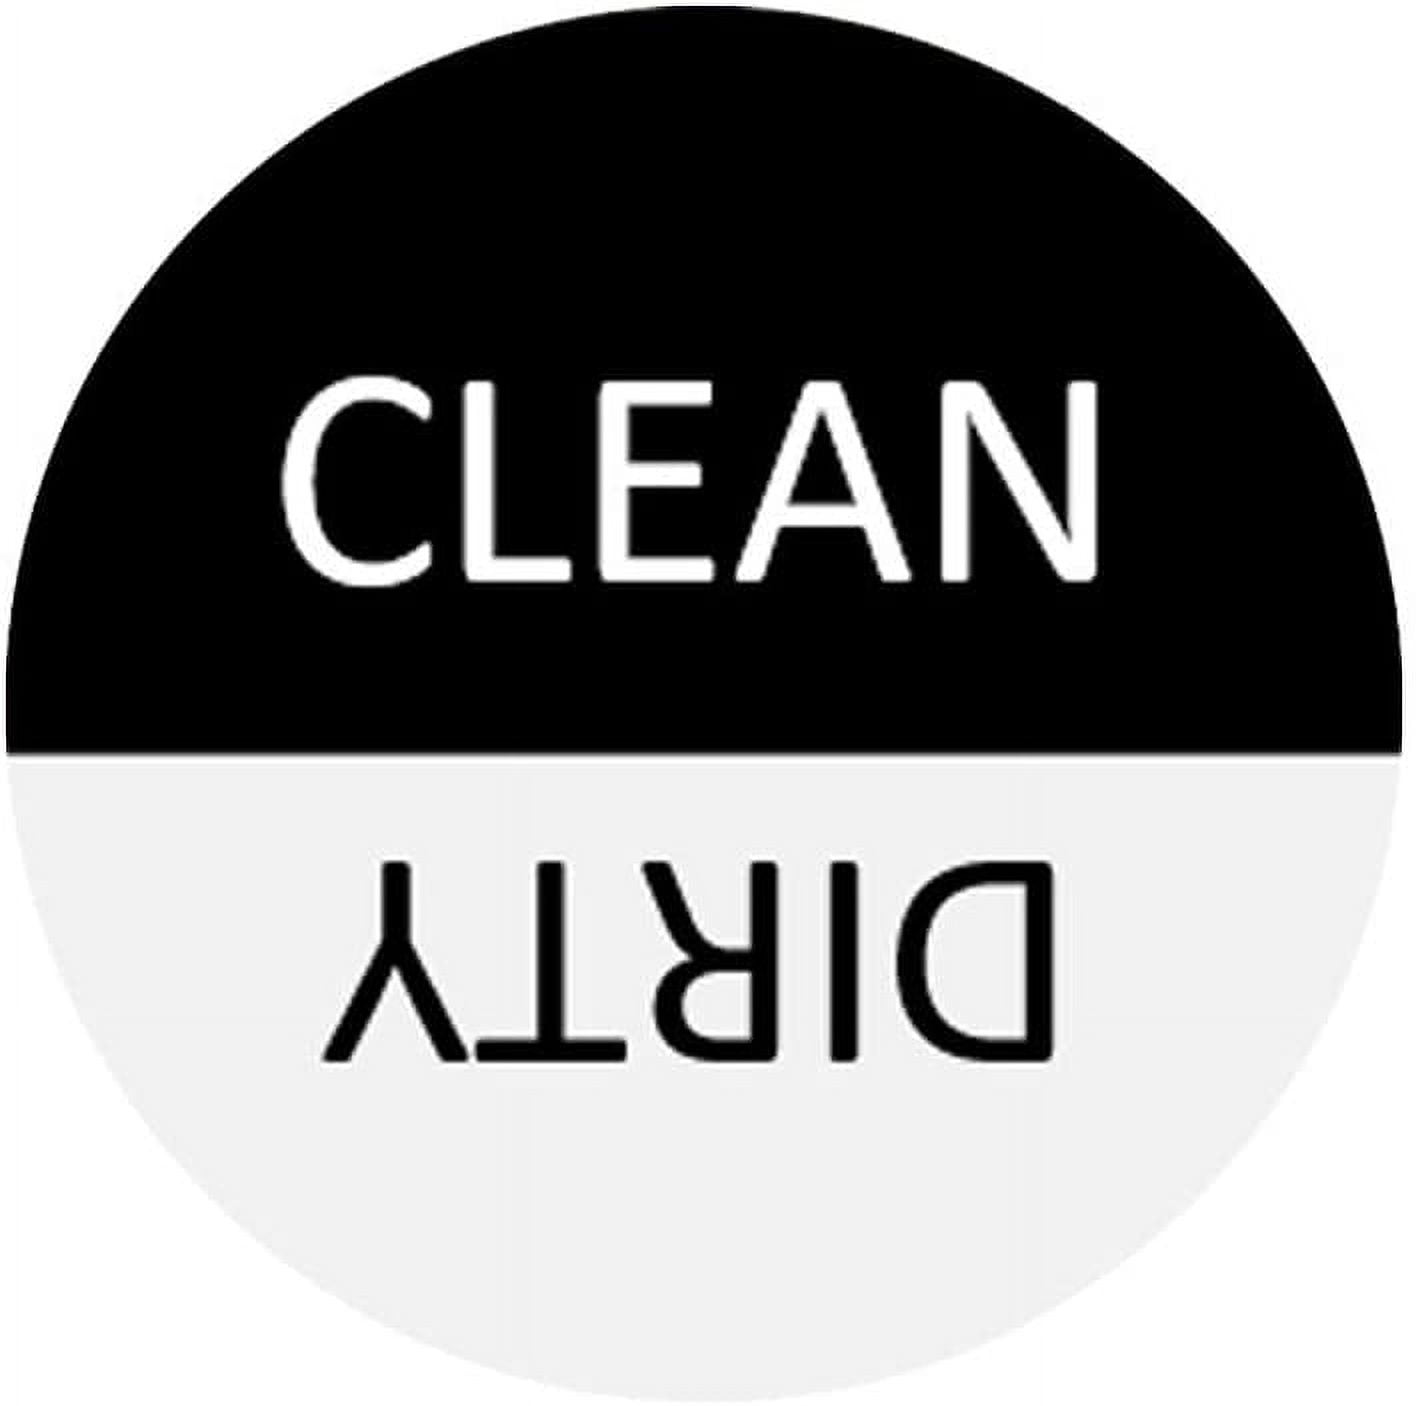 Dishwasher Magnet Clean Dirty Sign - 3 Inch Round Black & White  Refrigerator Magnets - Funny Housewarming Gifts - Suitable for All  Dishwashers! 